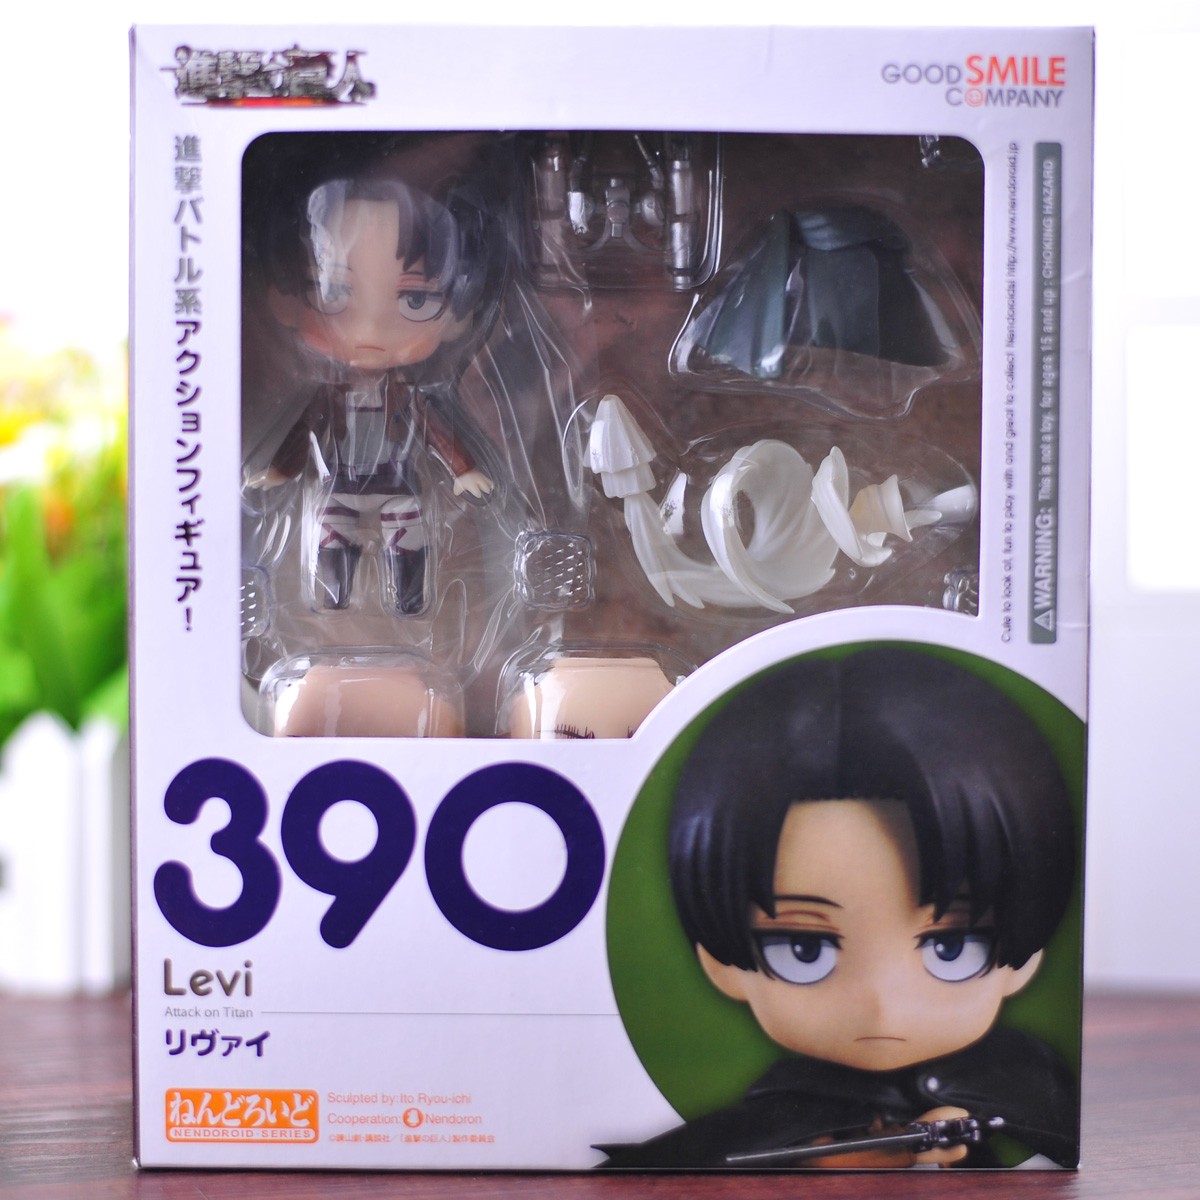 Gsc390 Levi Clay Doll Attack On Titan Action Model Toys For Children Eren Yeager Levi Ackerman - Attack On Titan Shop